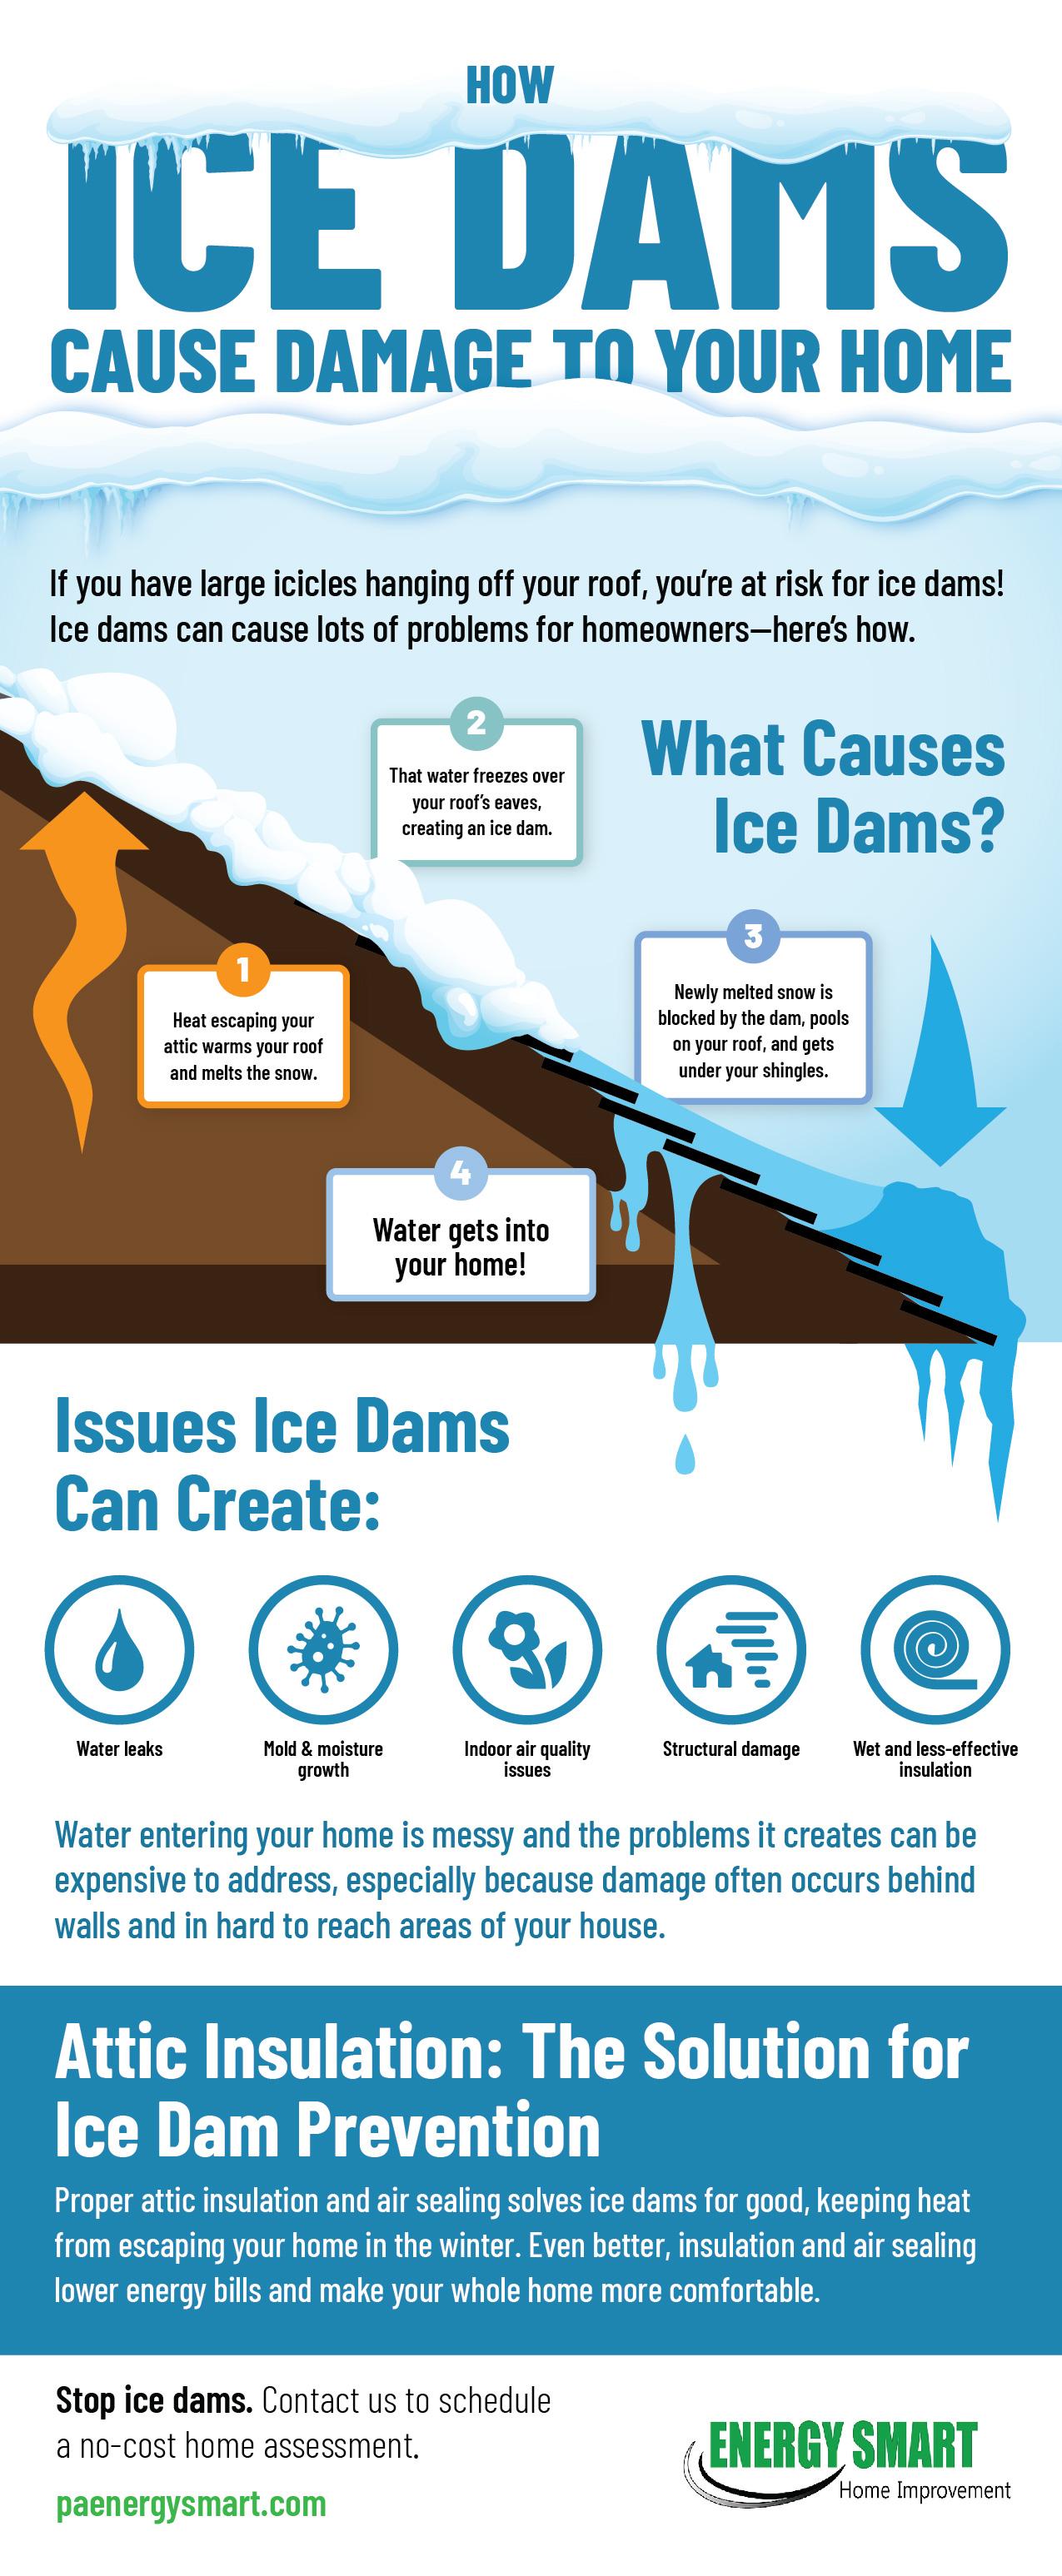 How Ice Dams Cause Damage to Your Home infographic